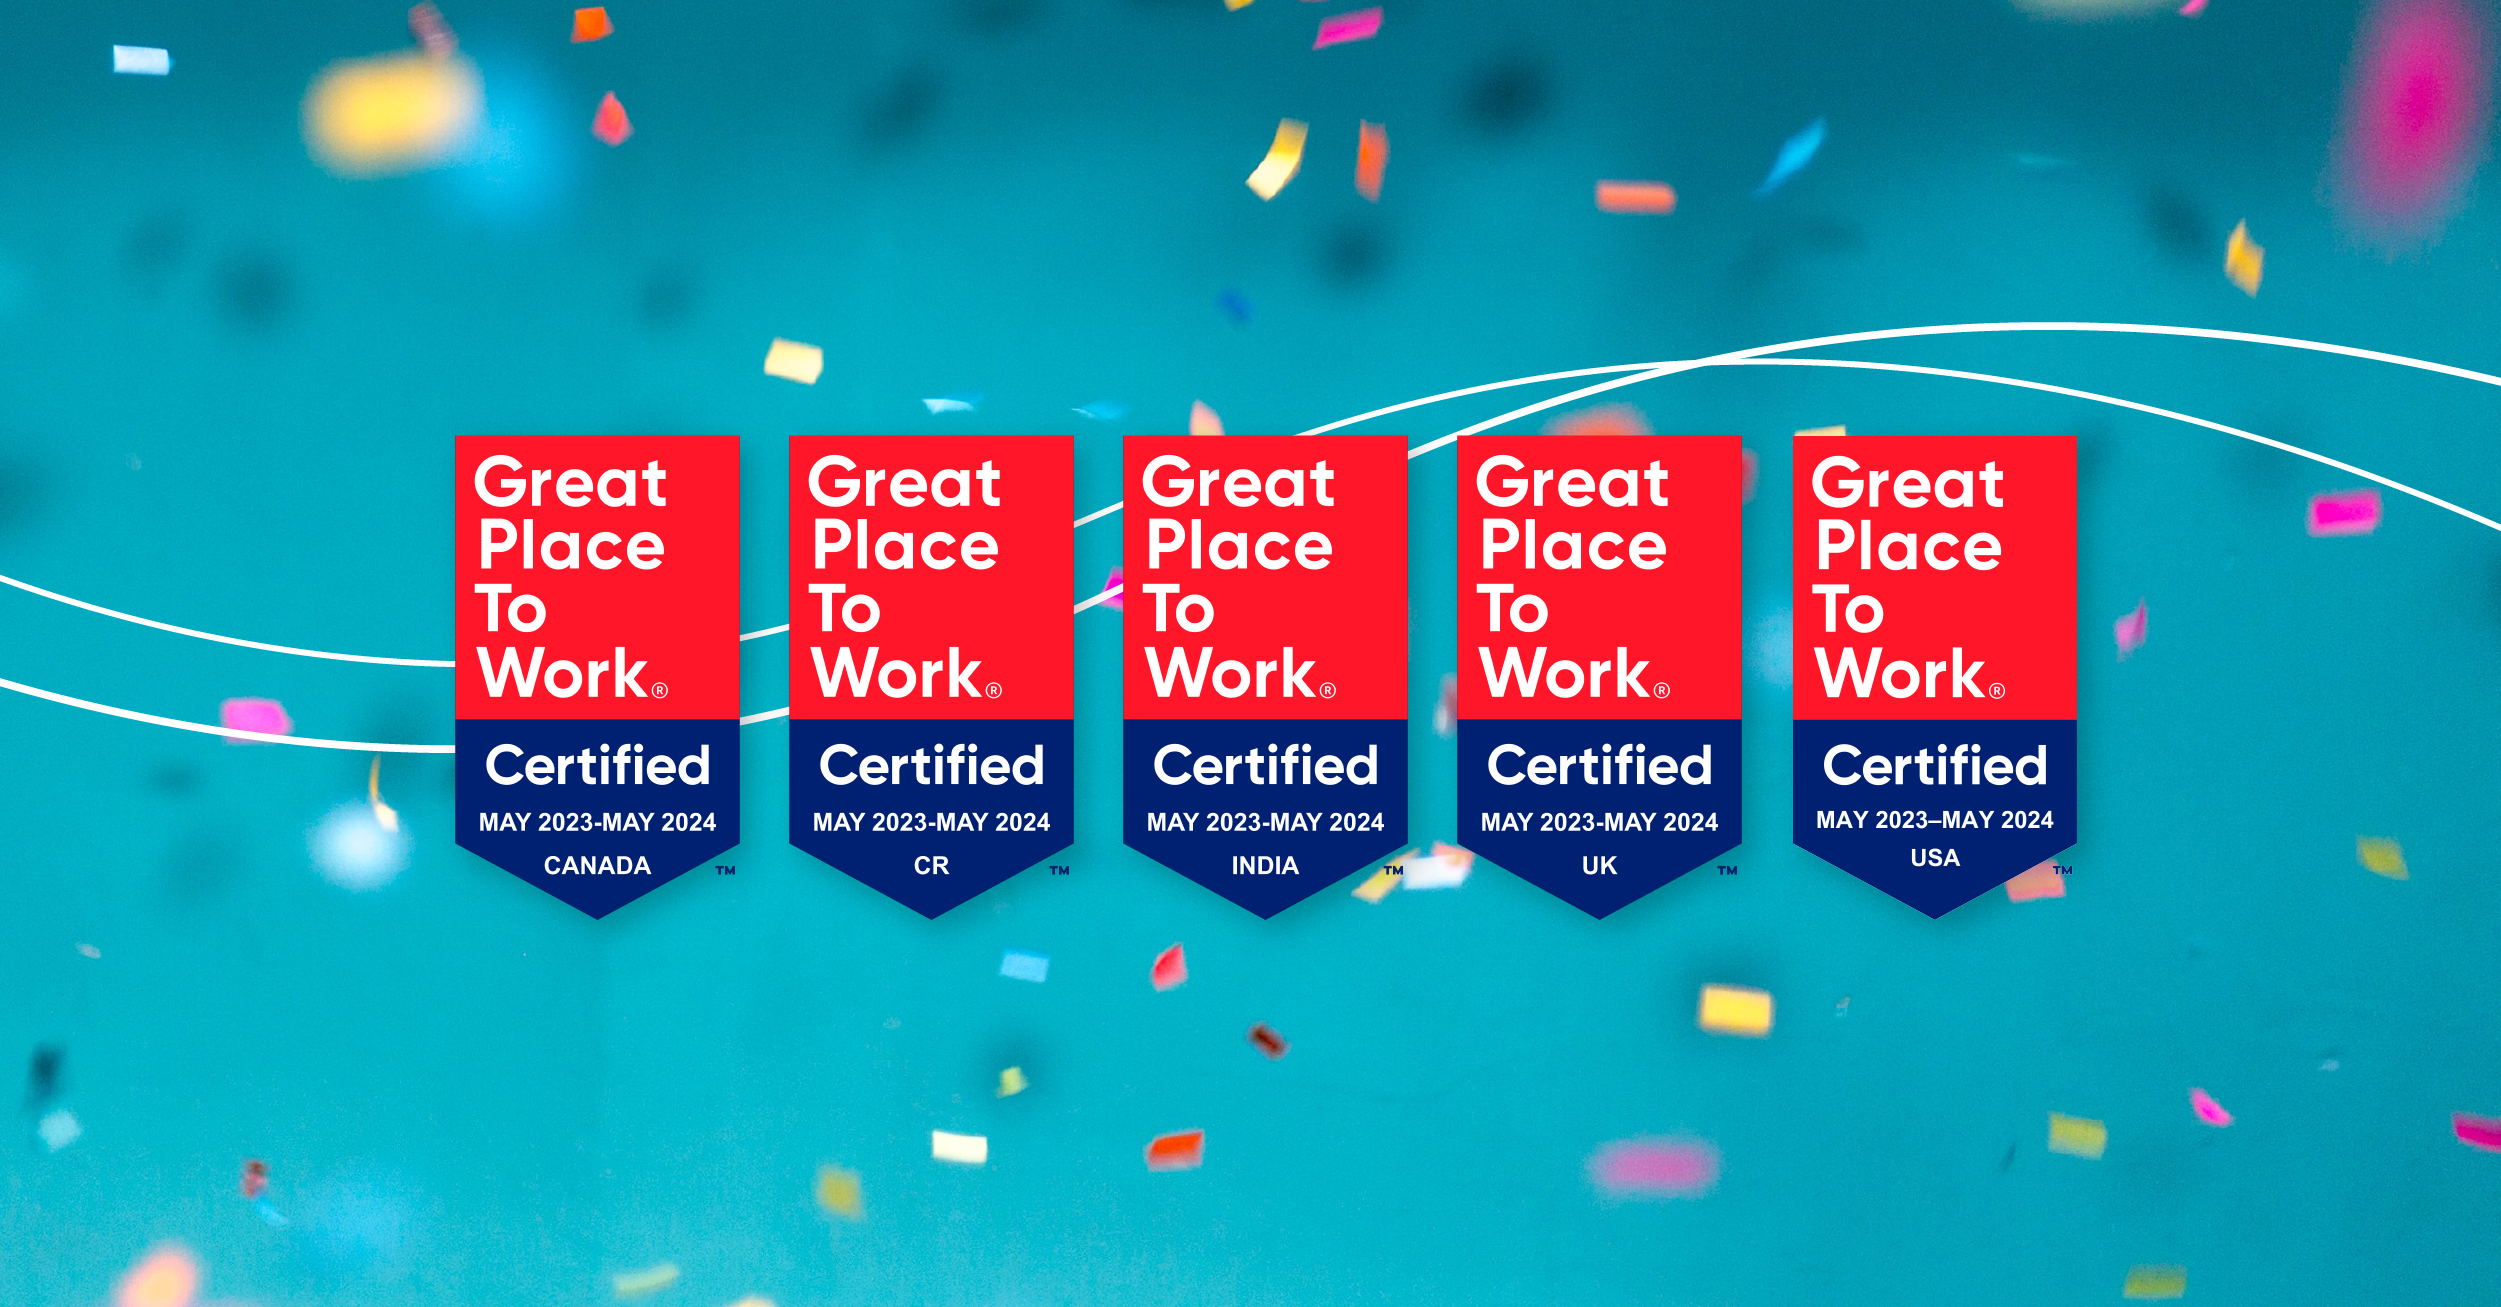 Great Place to Work badges for Canada, Costa Rica, India, UK, USA